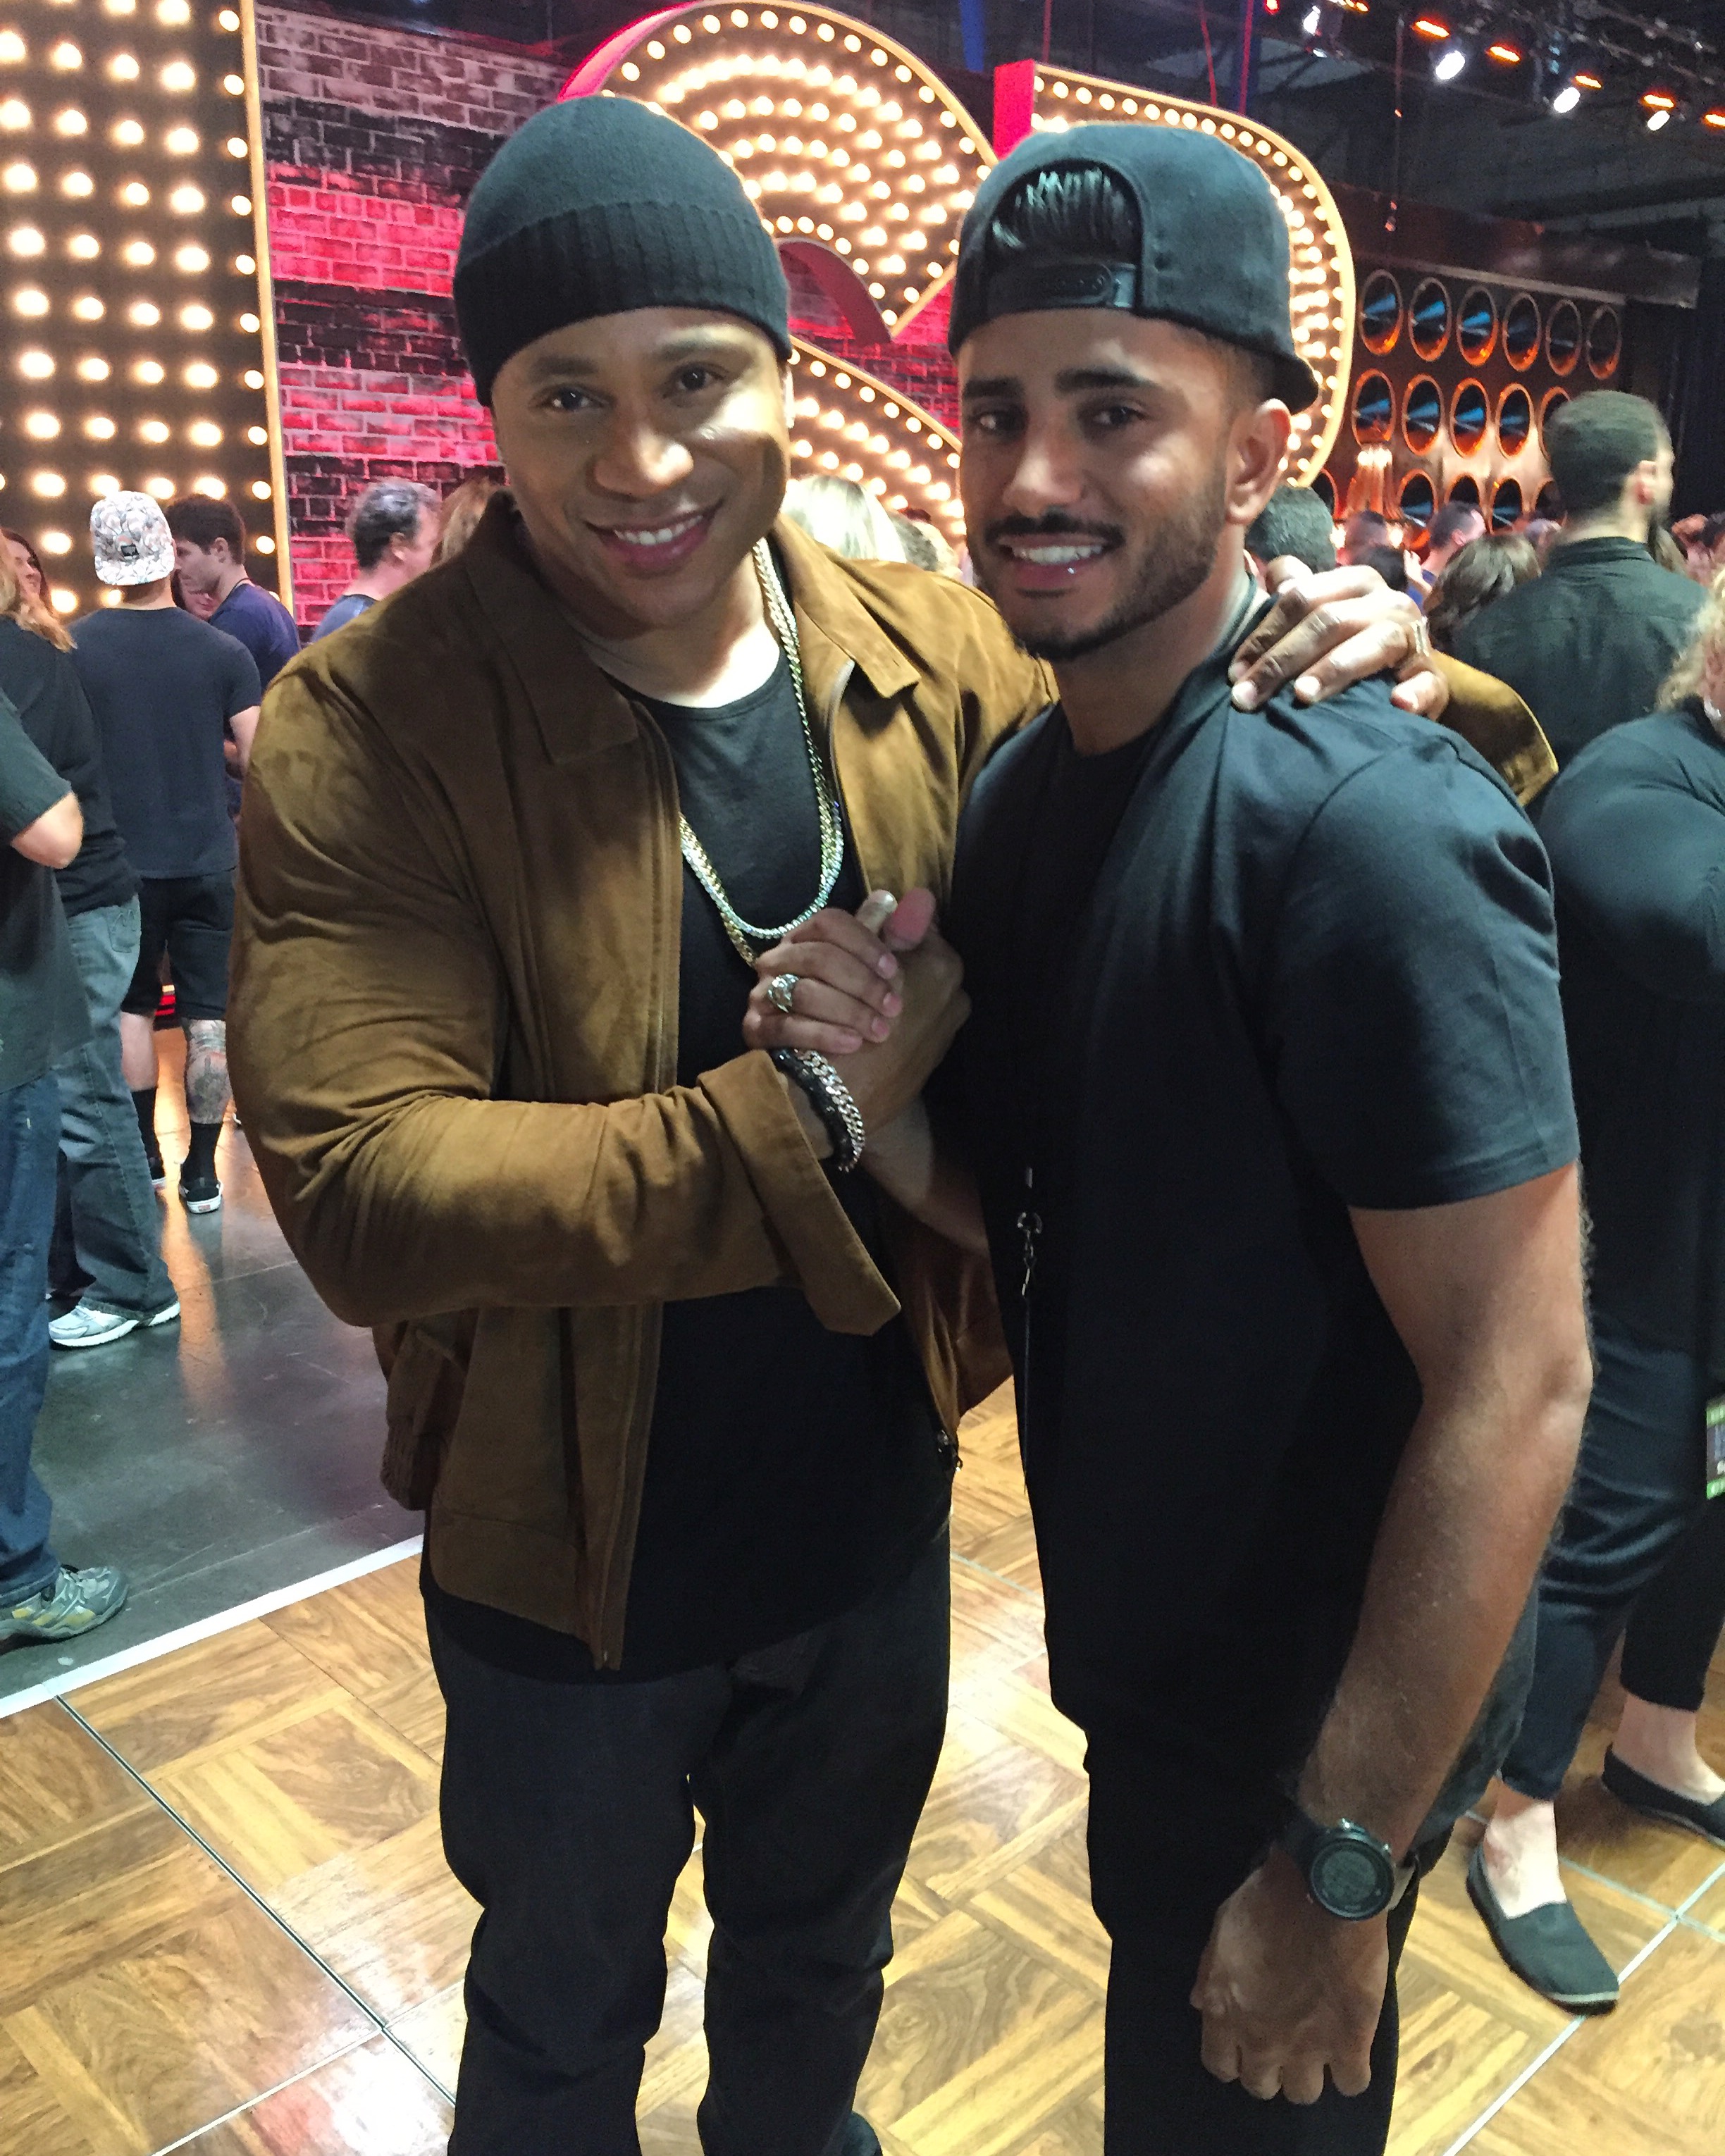 Sound supervising SpikeTV's Lip Sync Battle at Sony Pictures - w/LL Cool J